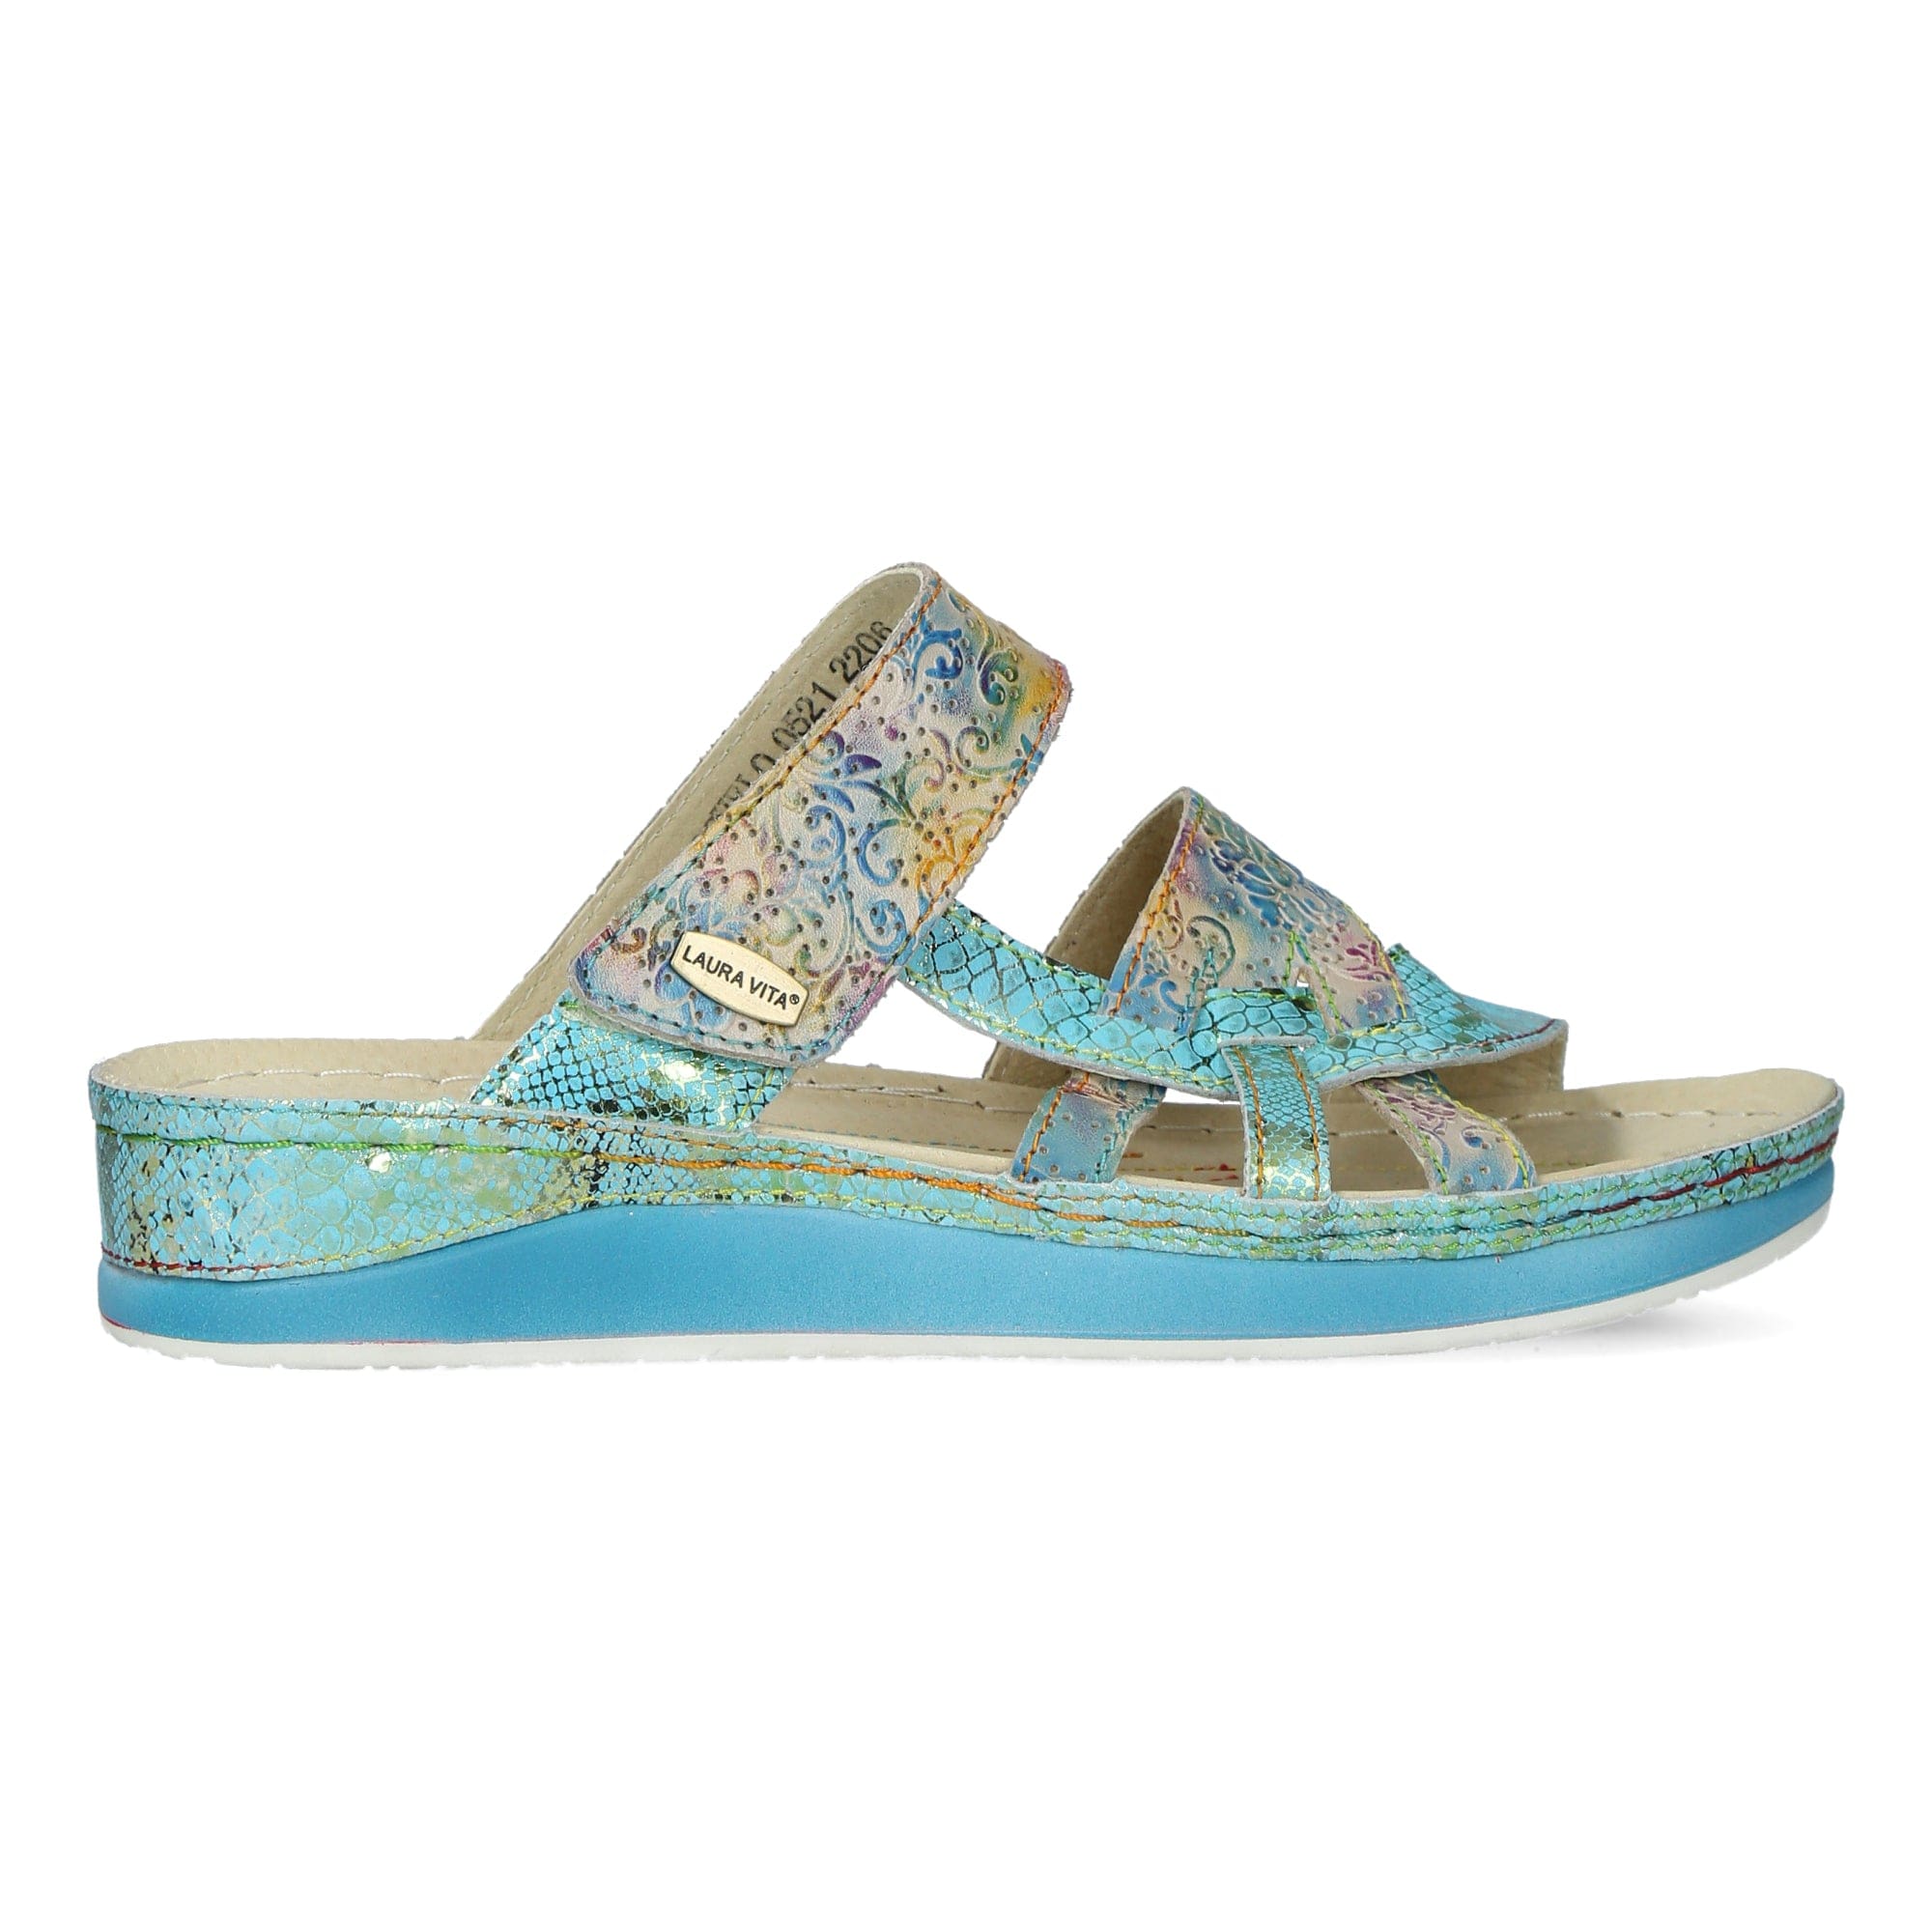 Chaussure BRCUELO 0521 - 35 / Turquoise - Mule